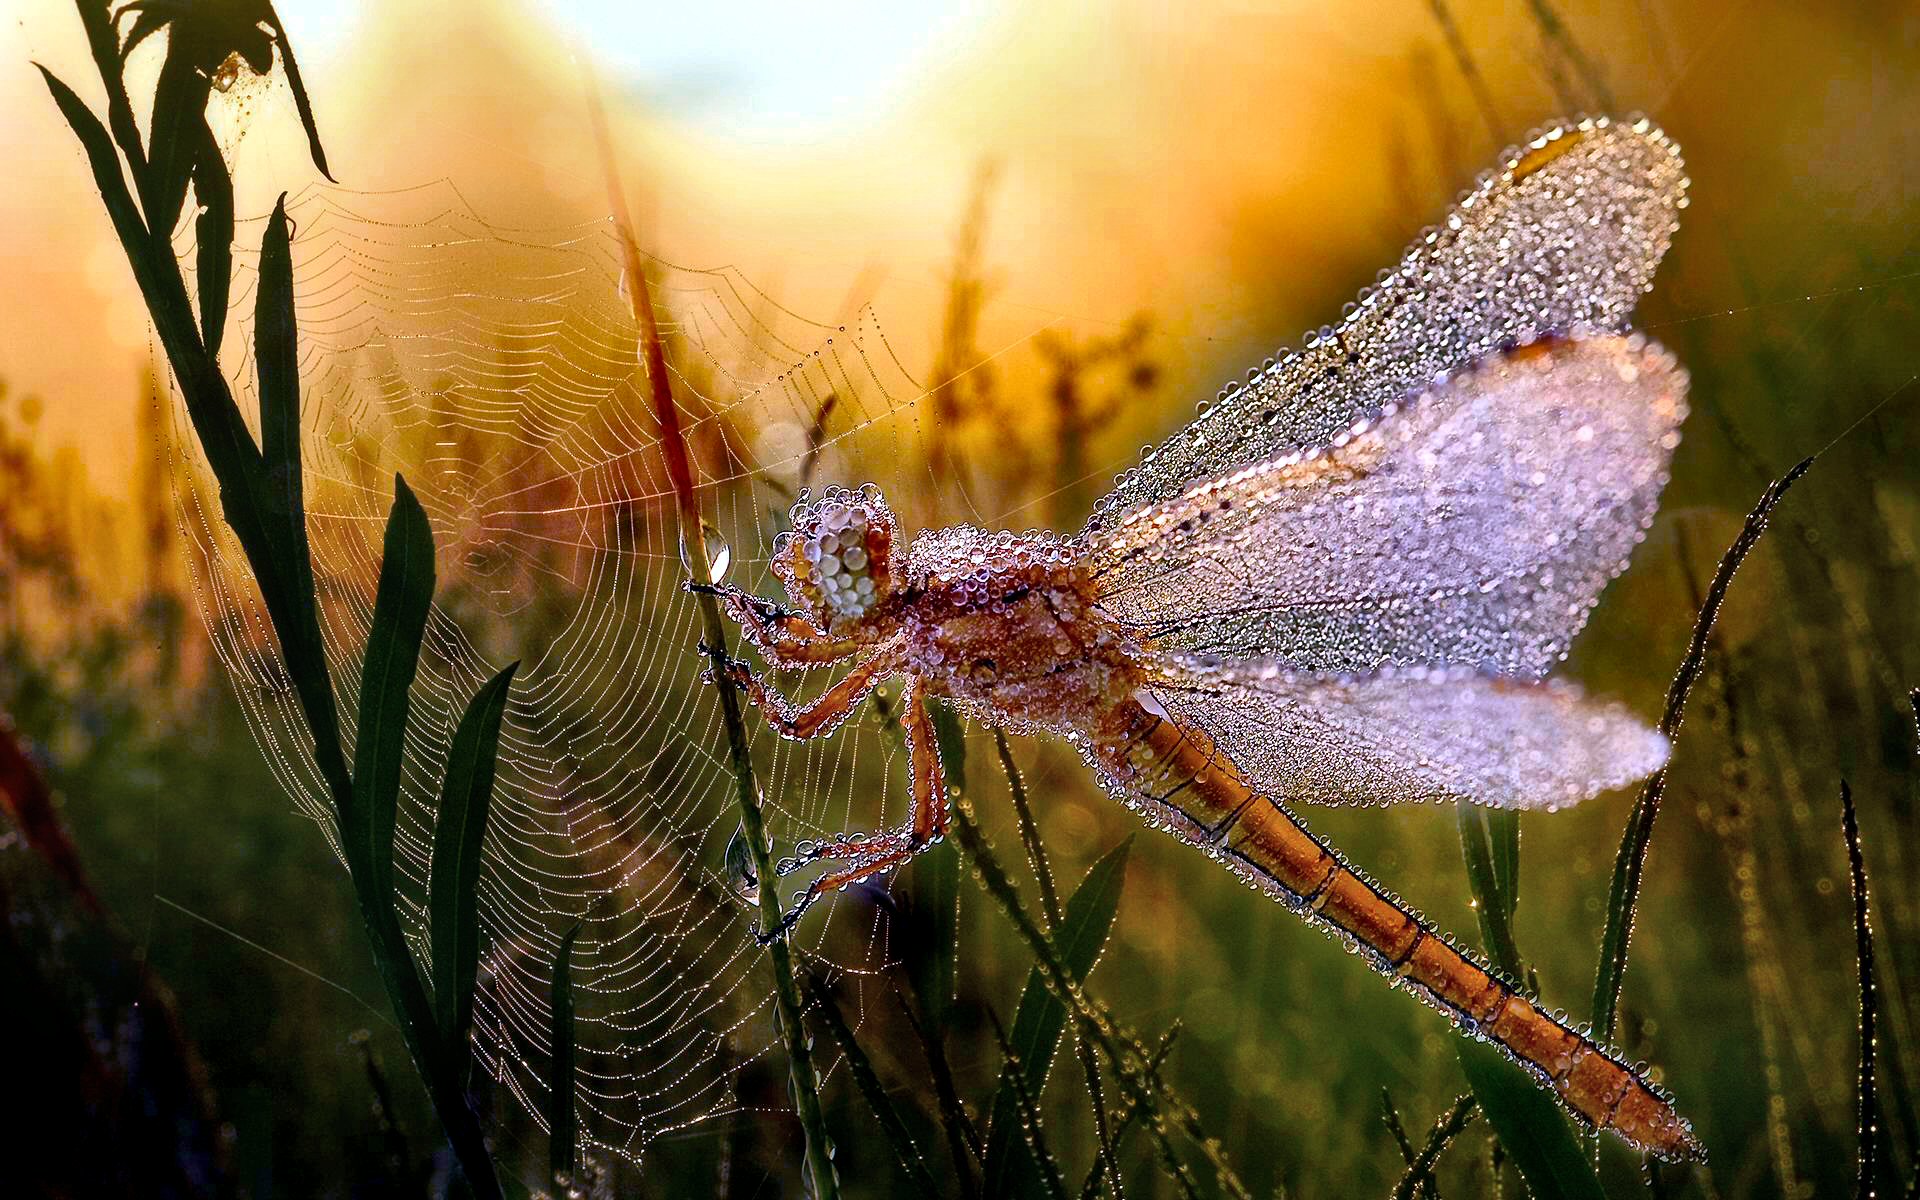 morning, insect, animal, dragonfly, dew, leaf, spider web, insects